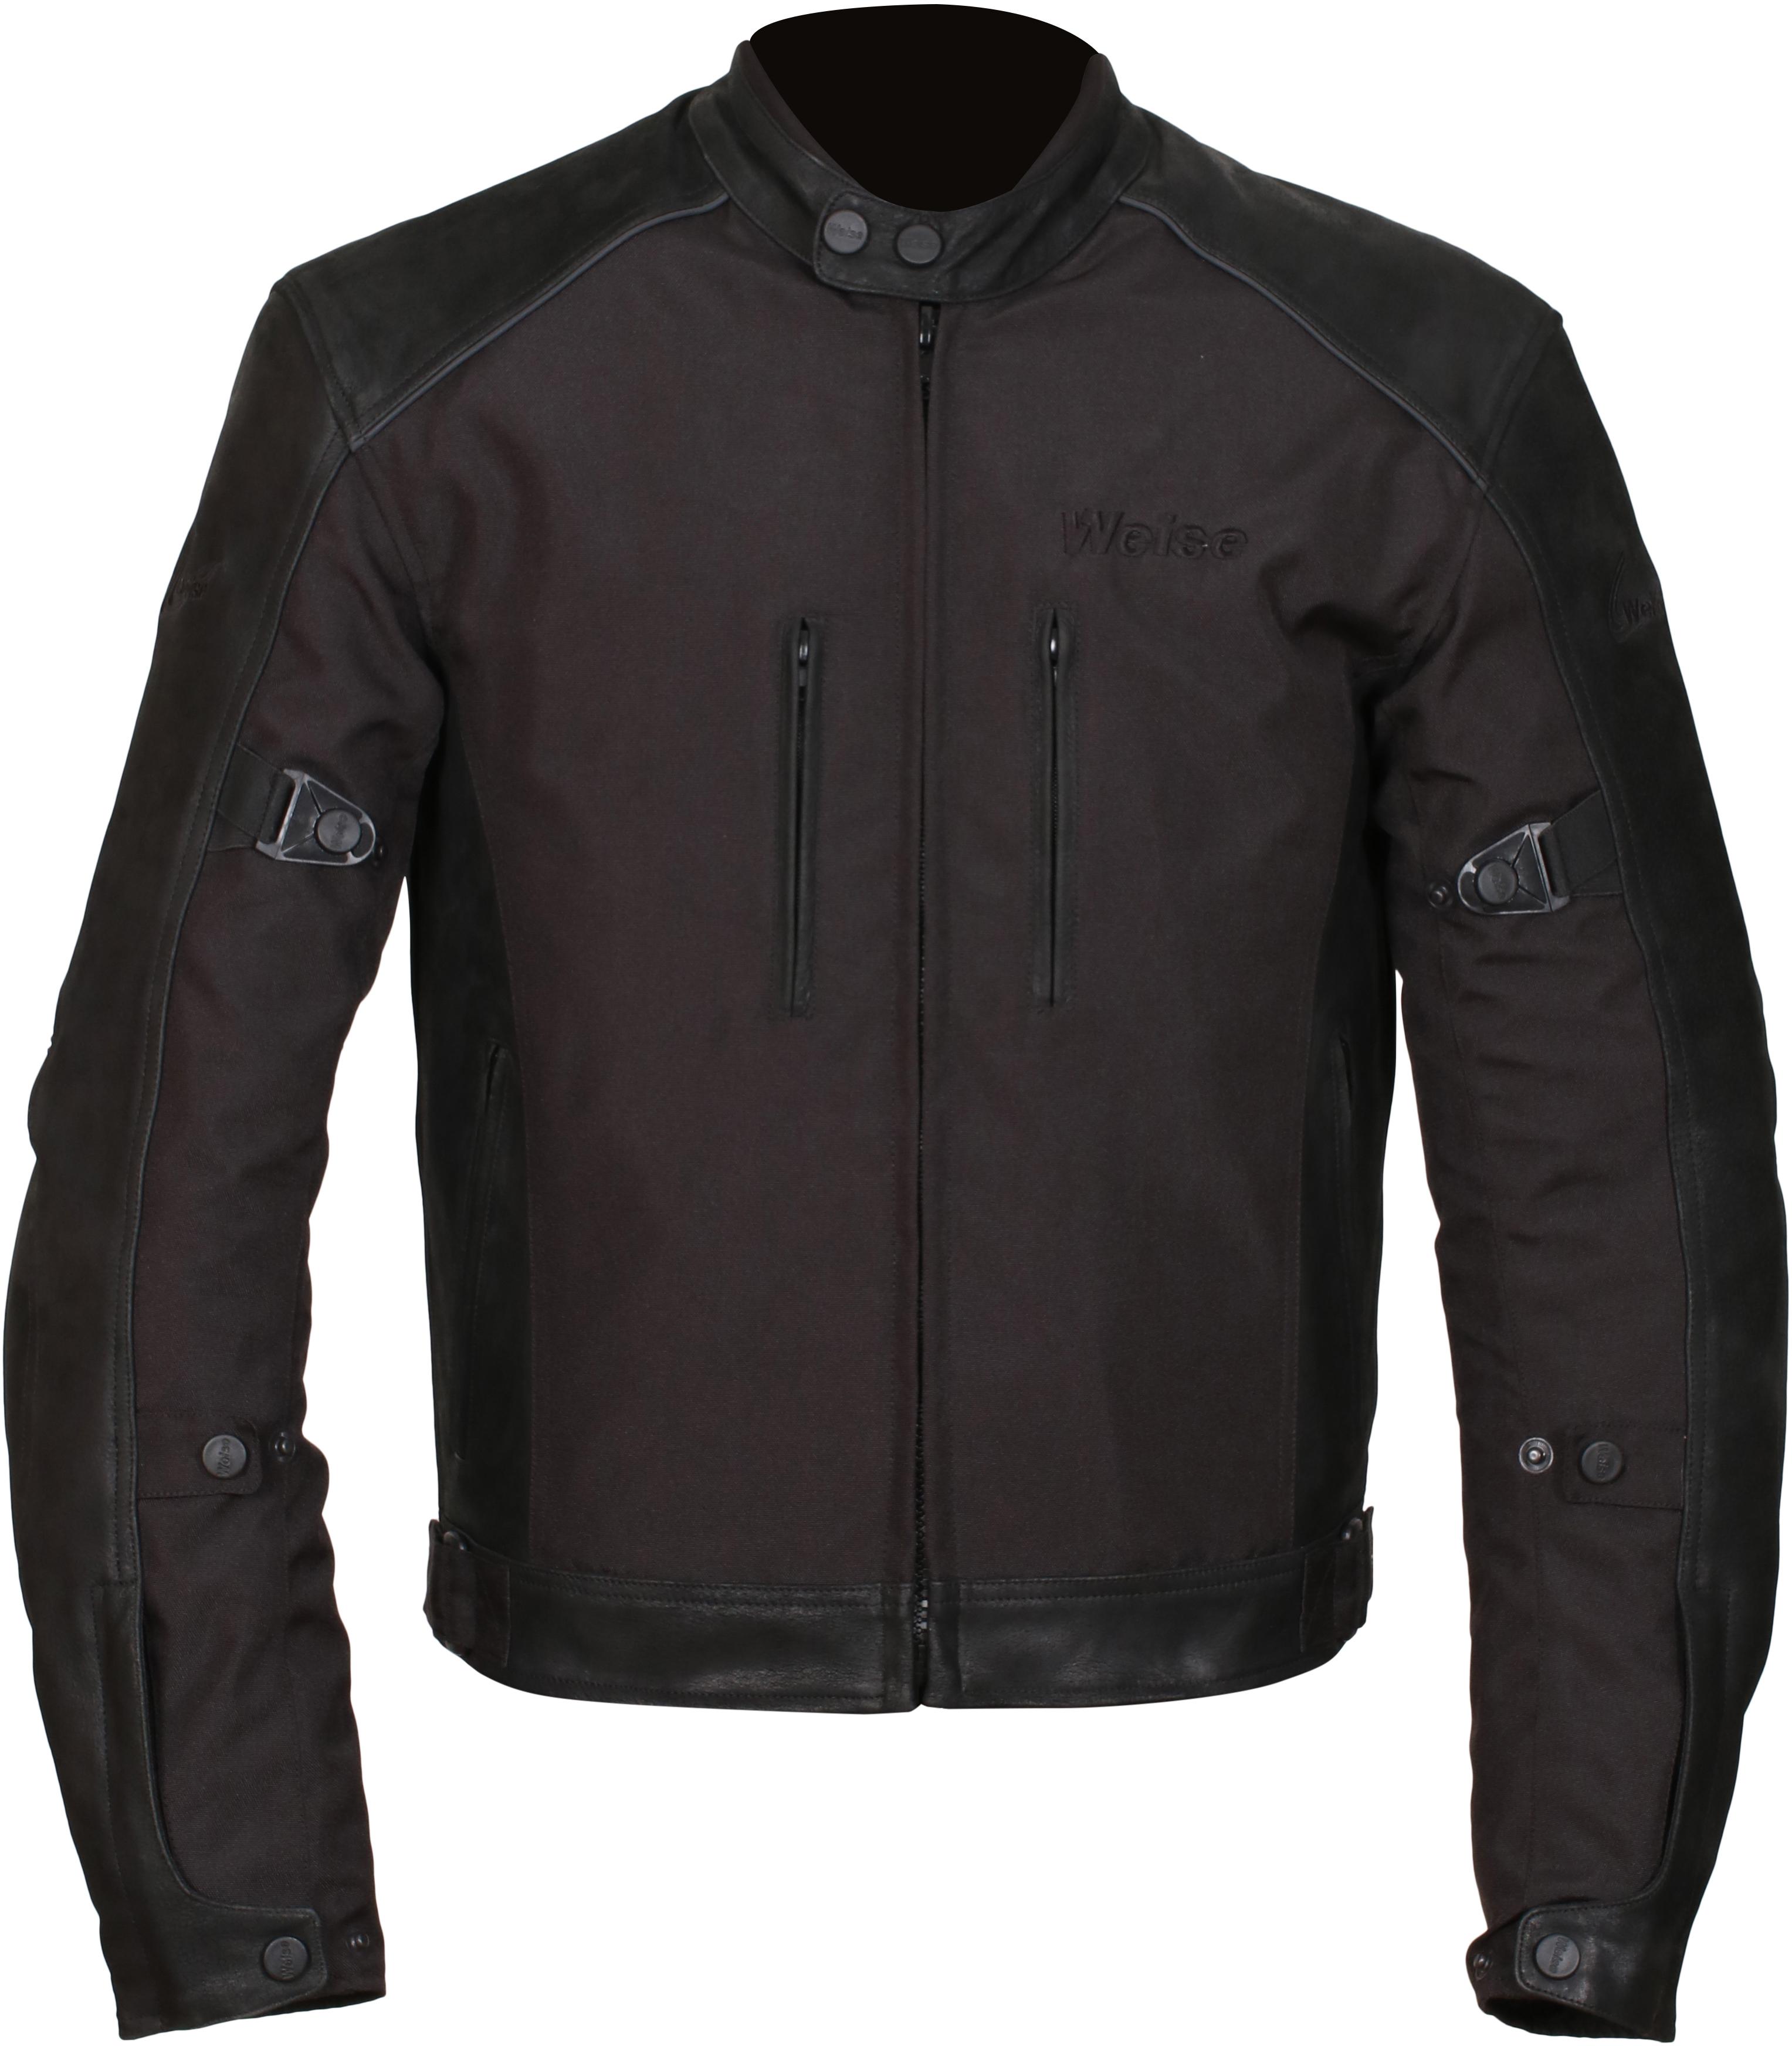 Weise Mission Motorcycle Jacket - Black, Xl